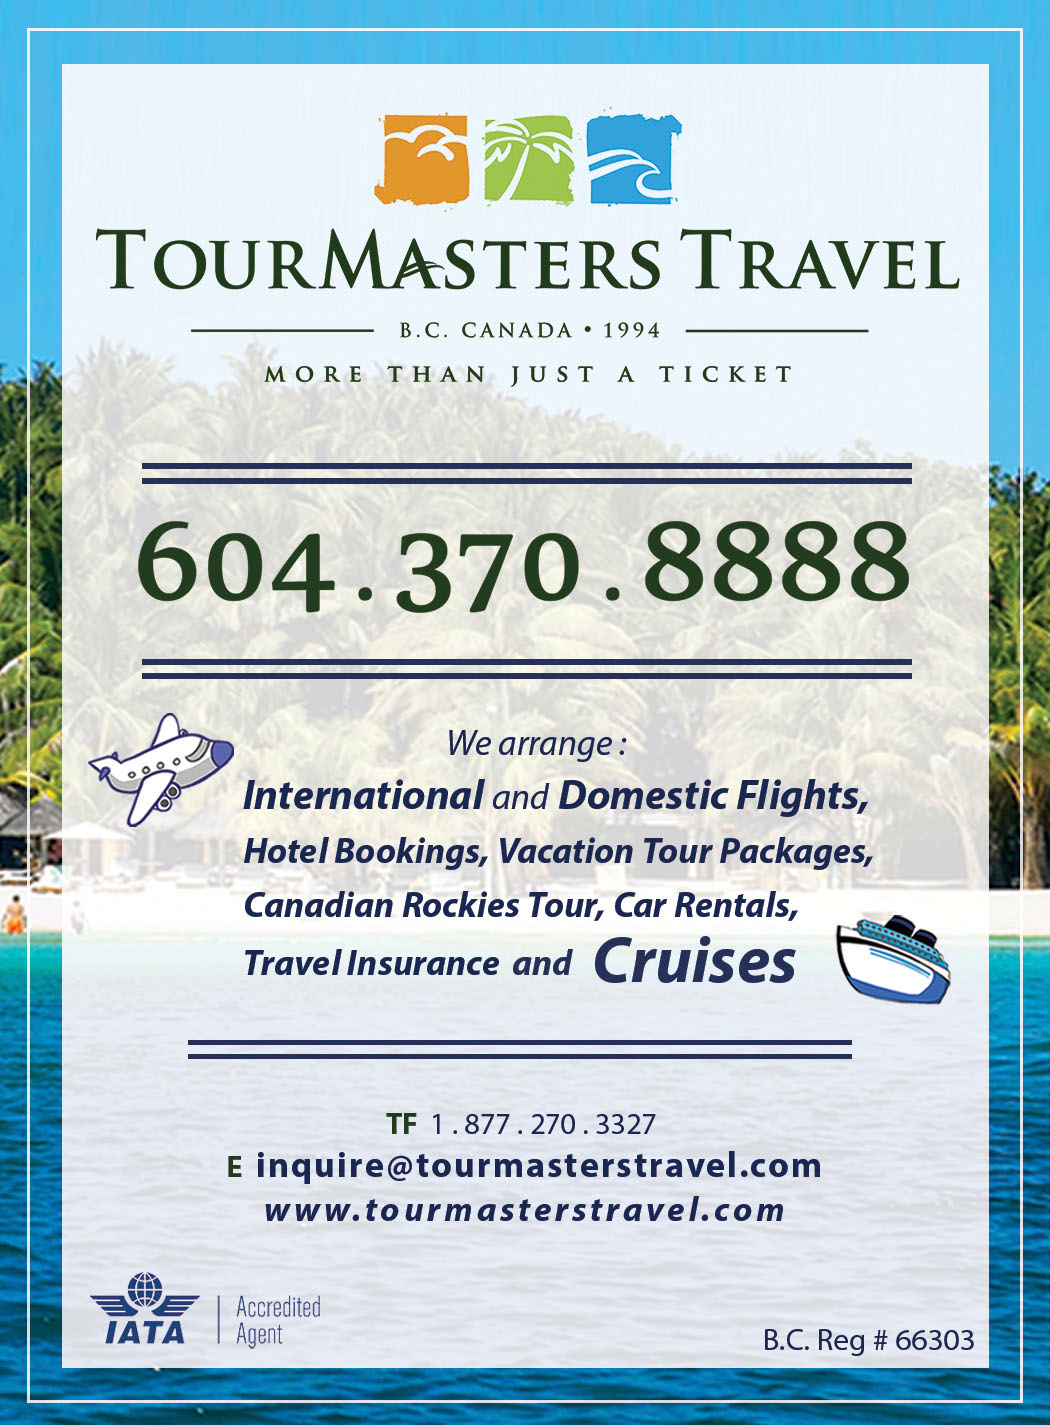 Tourmasters travel